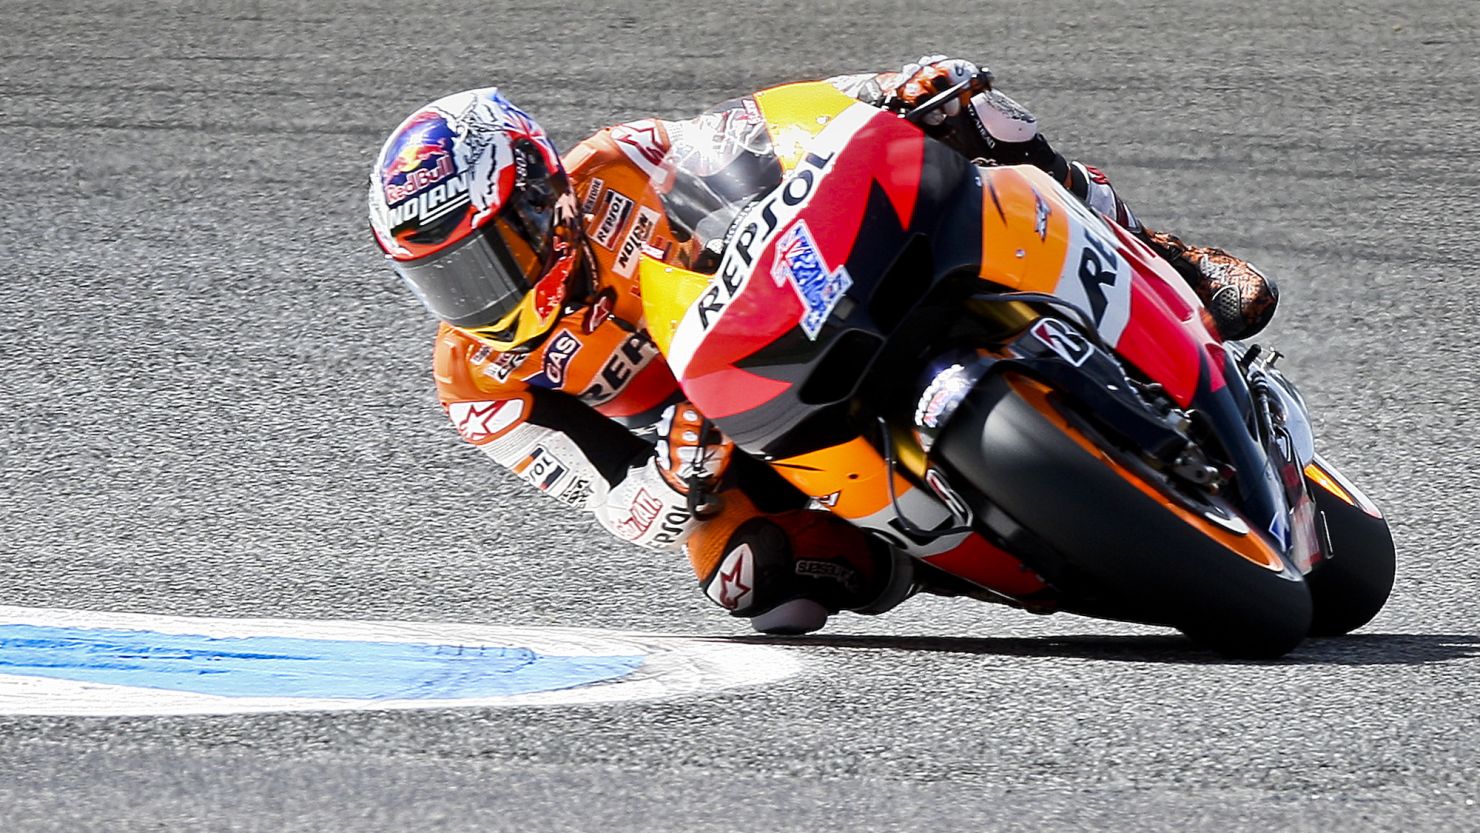 Reigning world champion Casey Stoner emerged on top after a thrilling MotoGP at Assen.